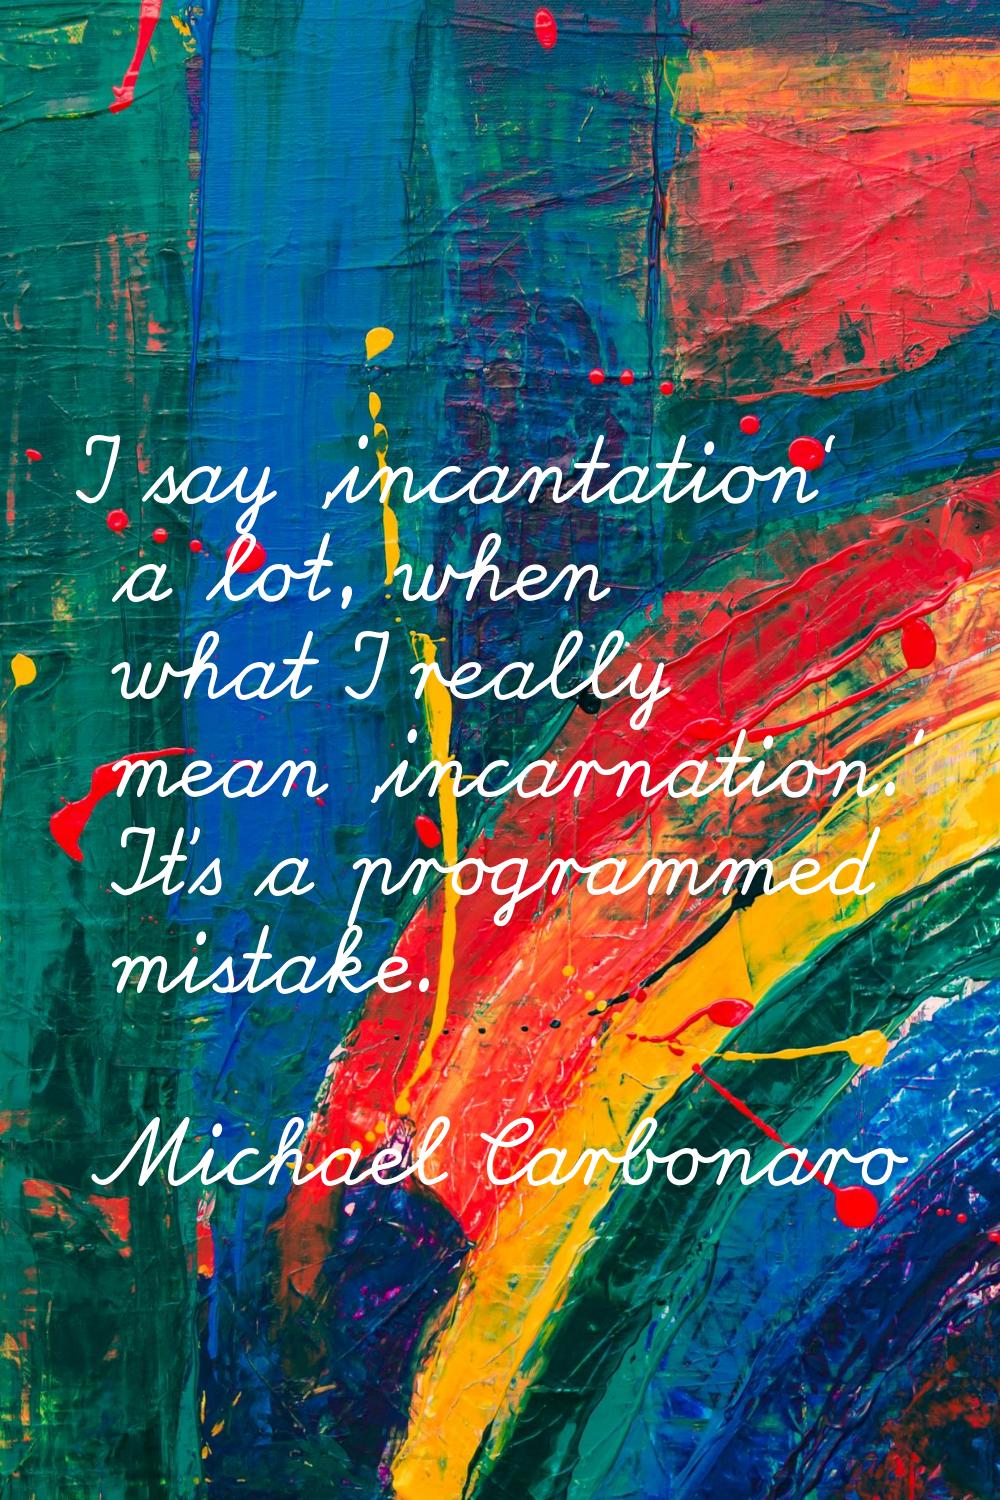 I say 'incantation' a lot, when what I really mean 'incarnation.' It's a programmed mistake.